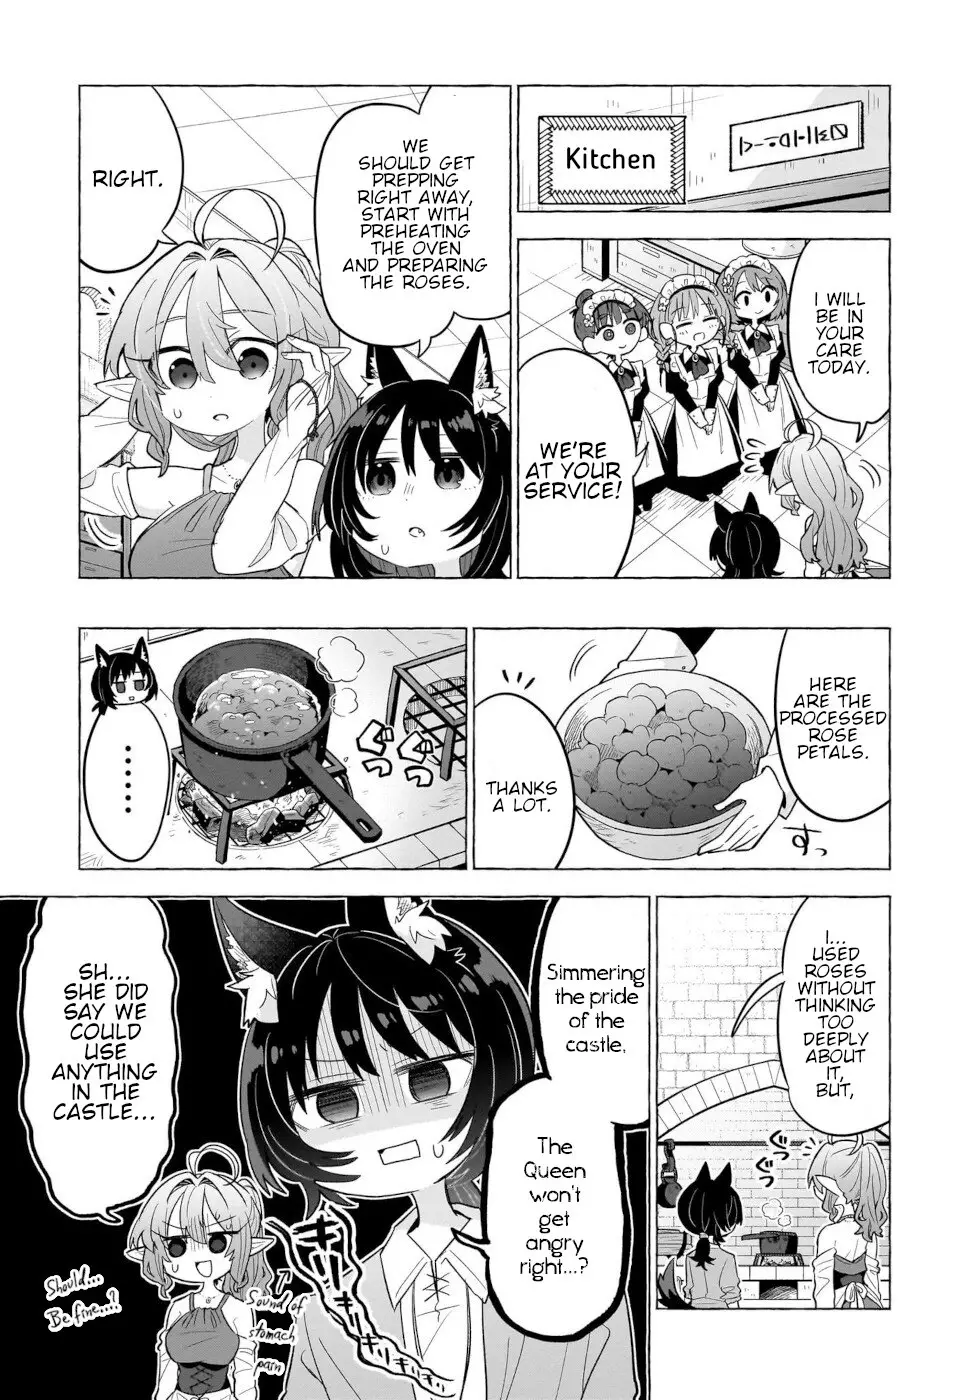 Sweets, Elf, And A High School Girl - 5 page 13-e1d82943